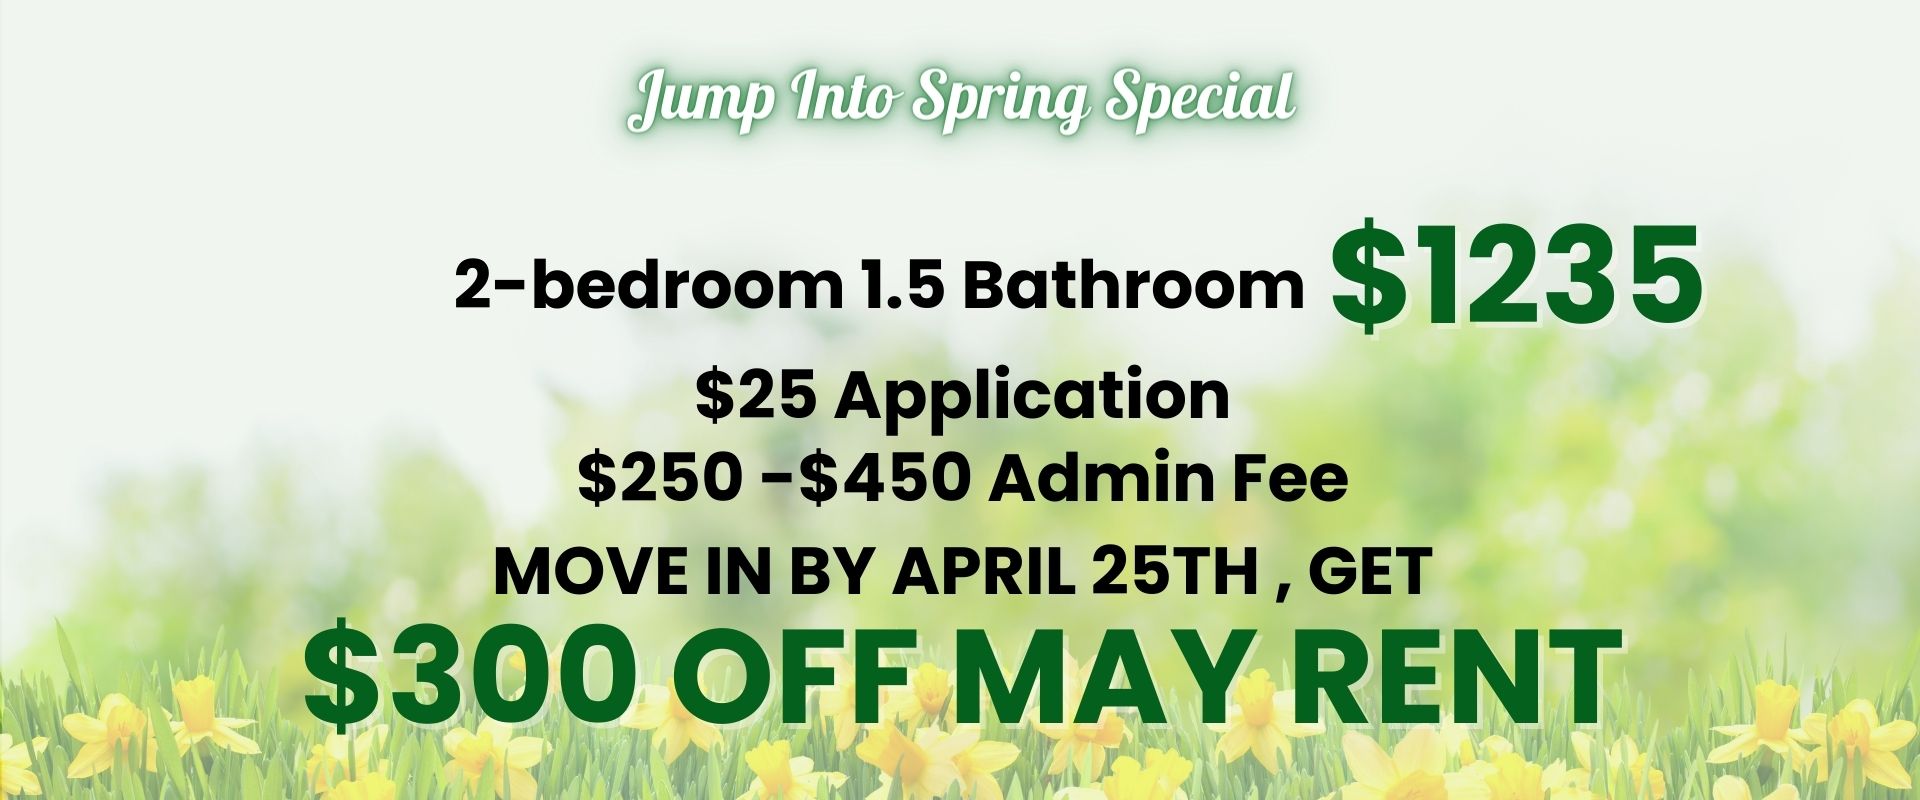 Jump Into Spring Special   2-bedroom 1.5 Bathroom - $1235   $25 application, $250 -$450 Admin fee   Move in by April 25th , get $300 off May rent